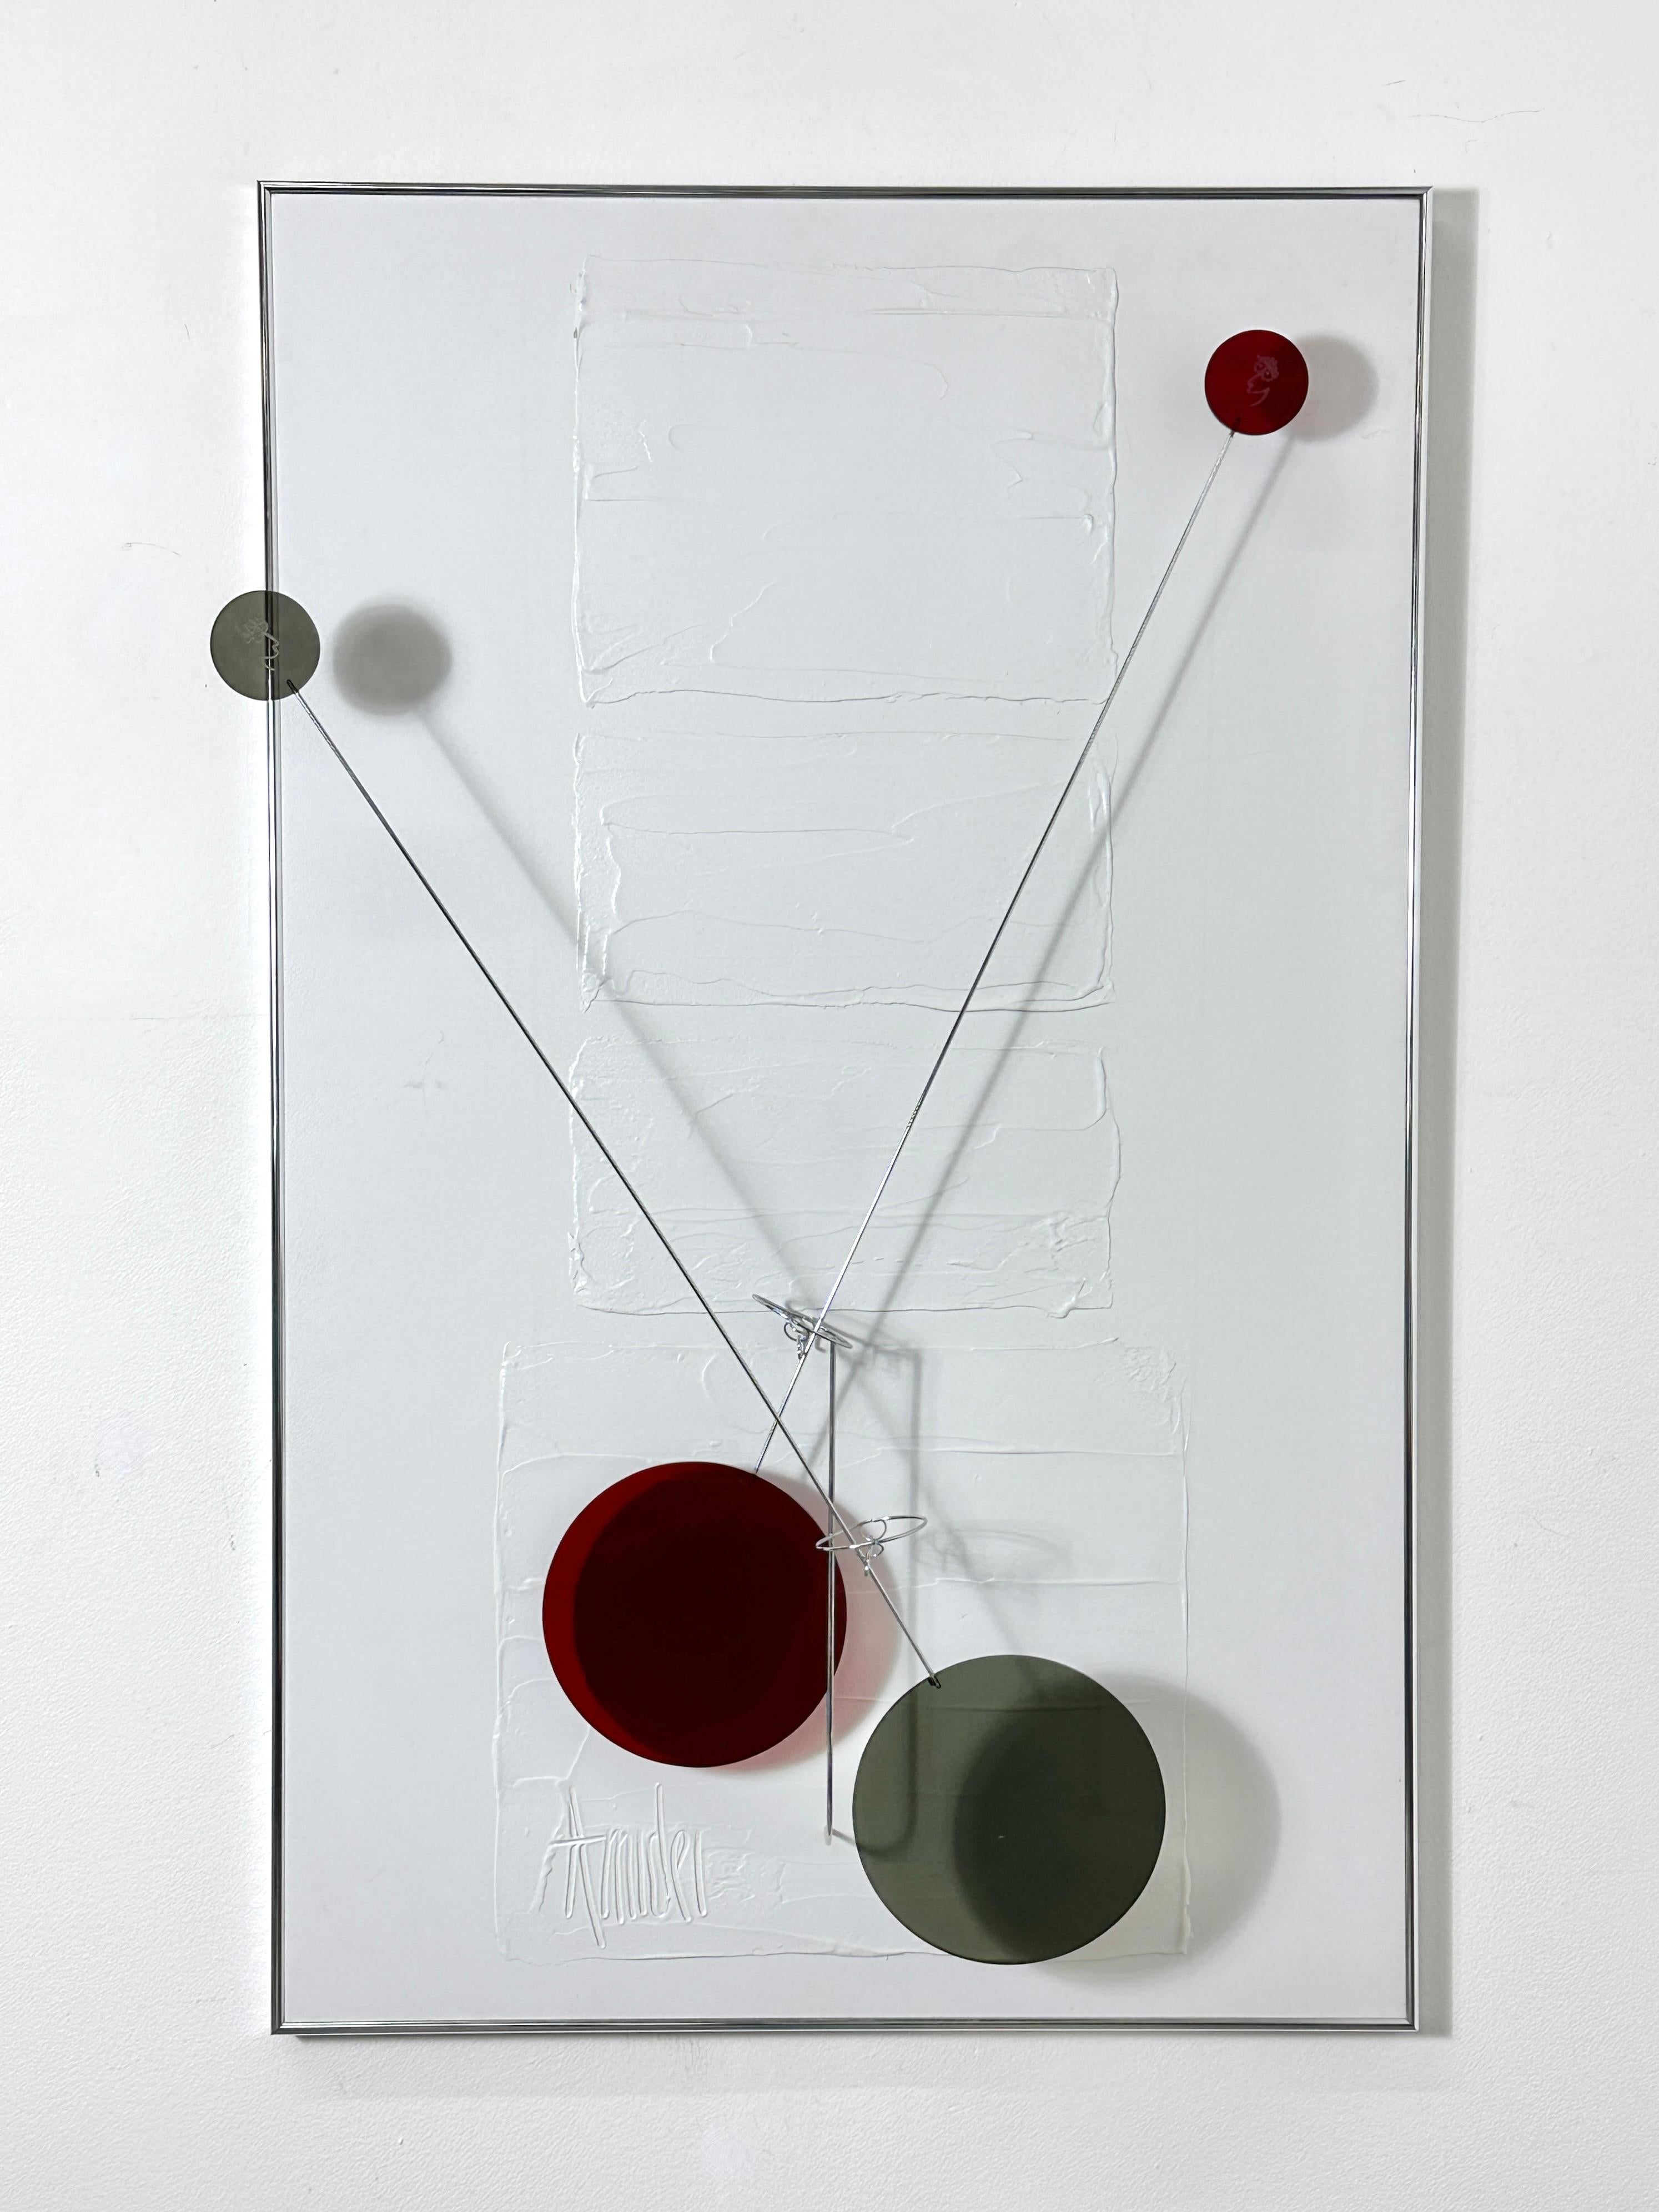 Unique wall sculpture by Chicago artist Amidei 1987

Kinetic pendulums with alternating deep red and smoked Lucite discs that oscillate against a white abstract textured canvas
Framed in chrome and signed both front and back

30 inches wide
48